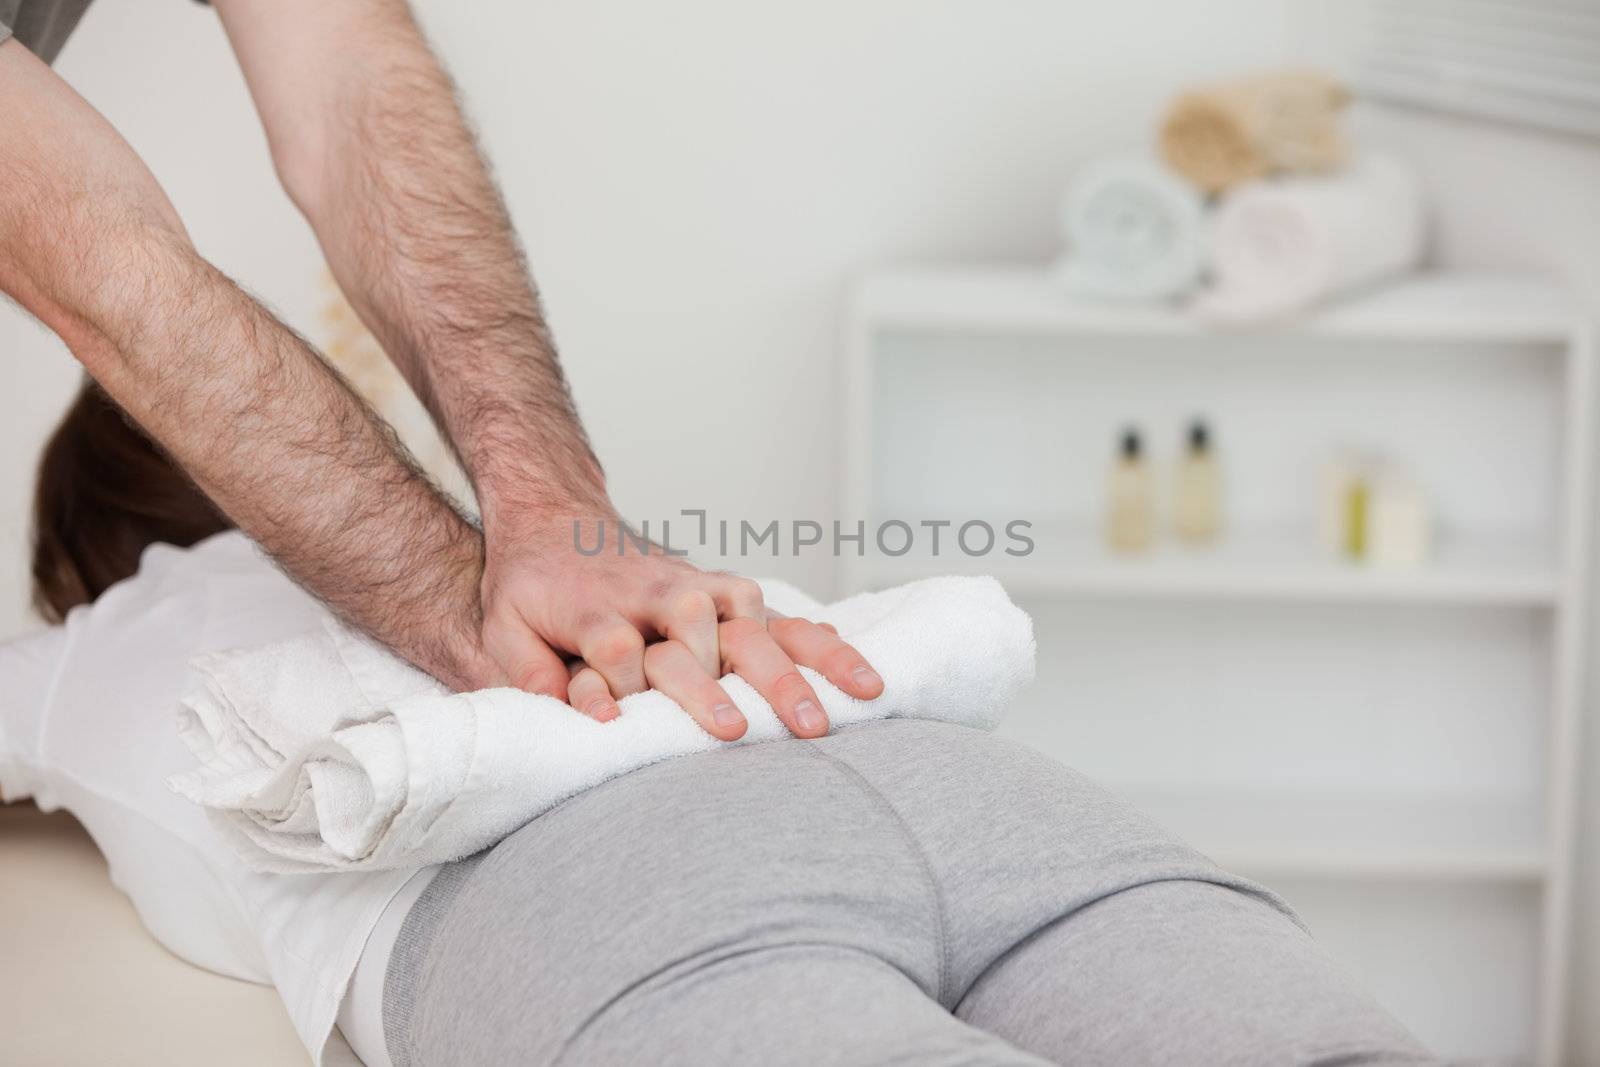 Masseur massaging a woman with a towel in a physio room